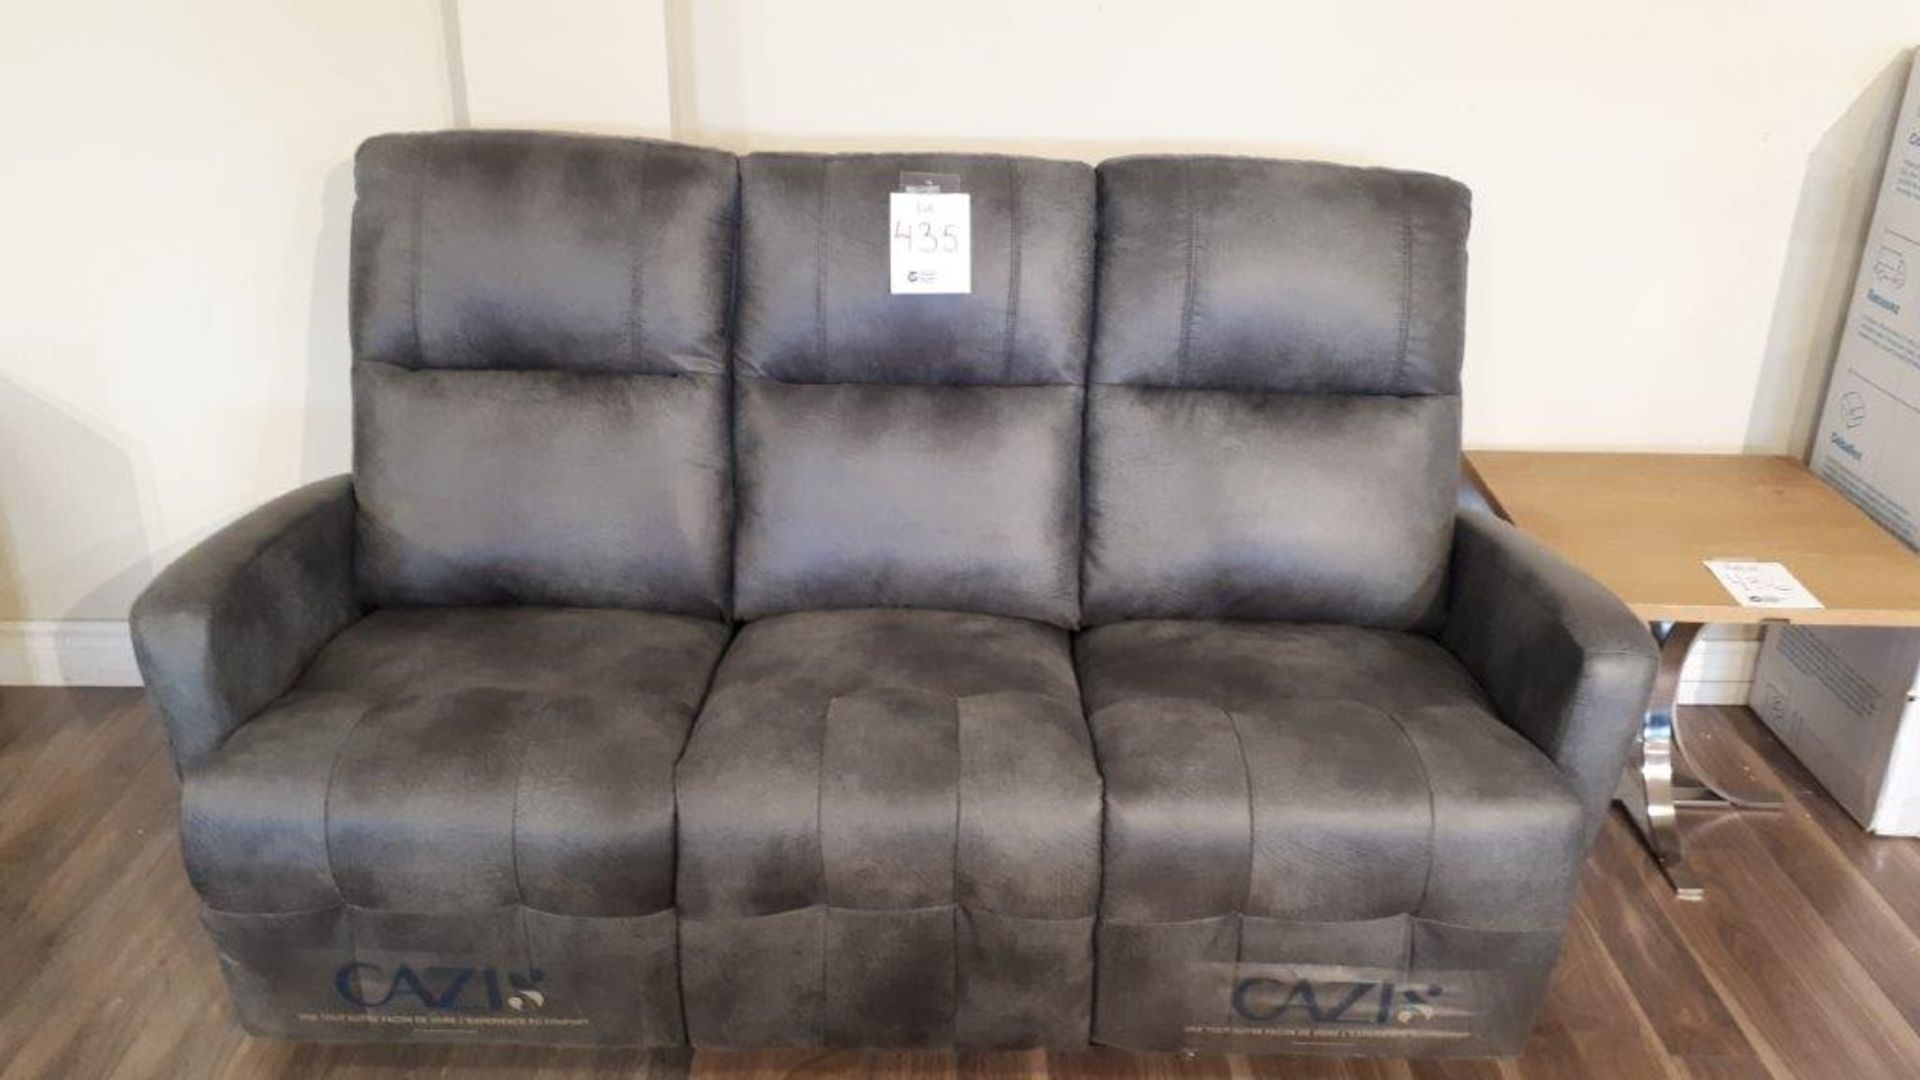 Cazi leather (bicast) recliner couch, 3 seat